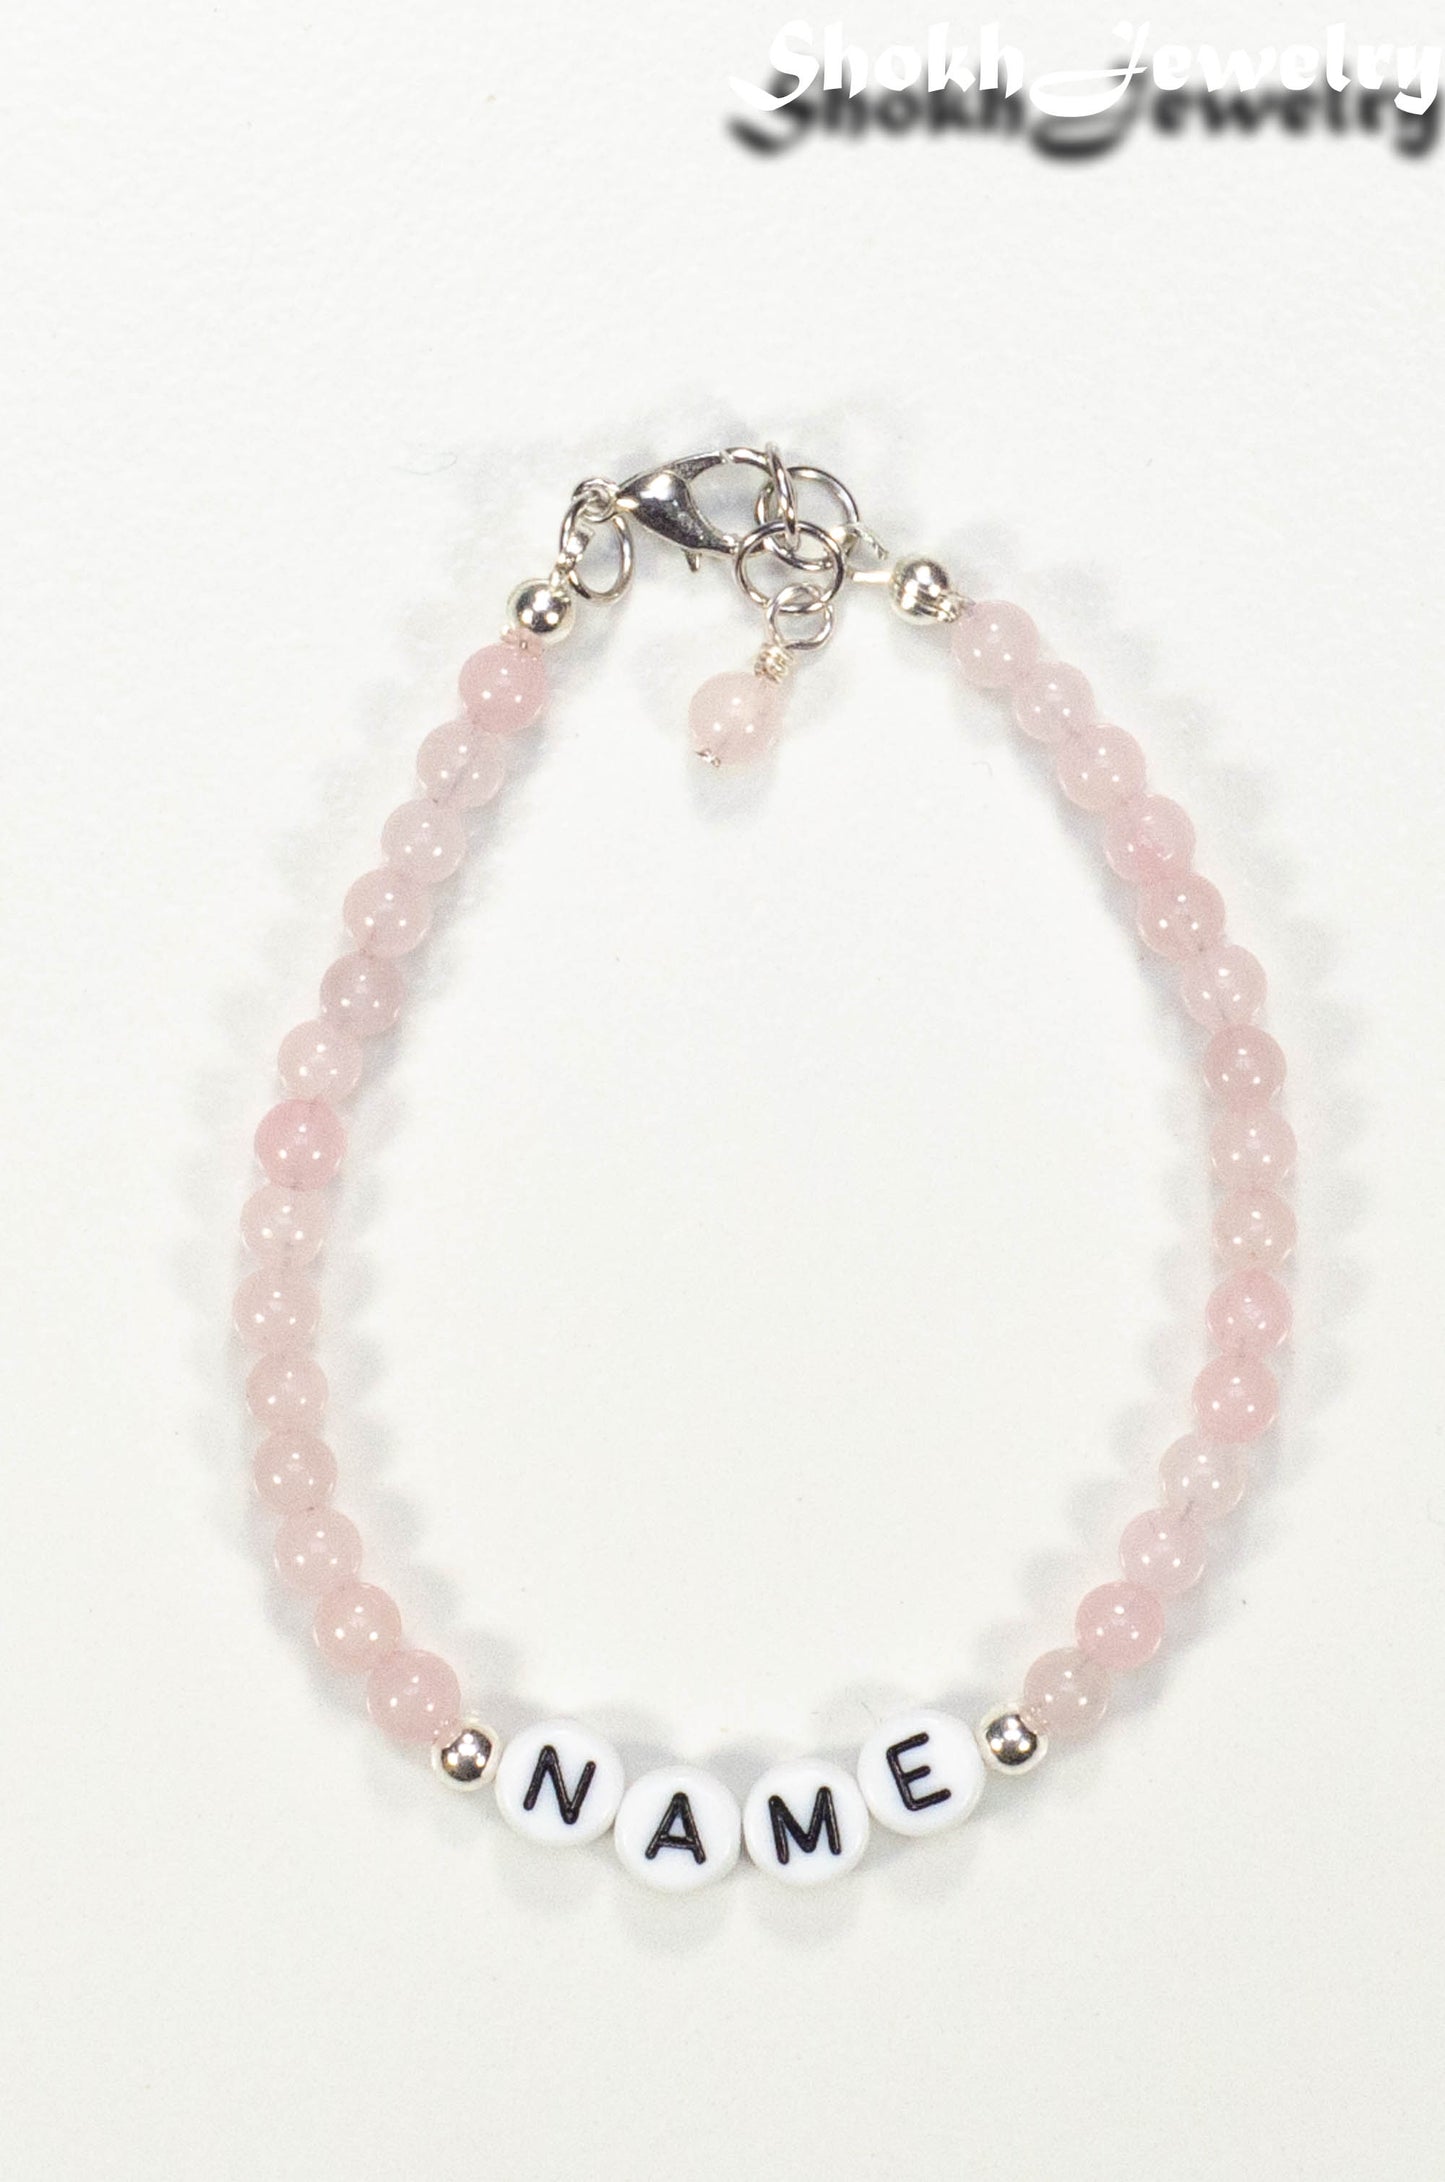 Top view of Personalized Rose Quartz Name Bracelet with Clasp.